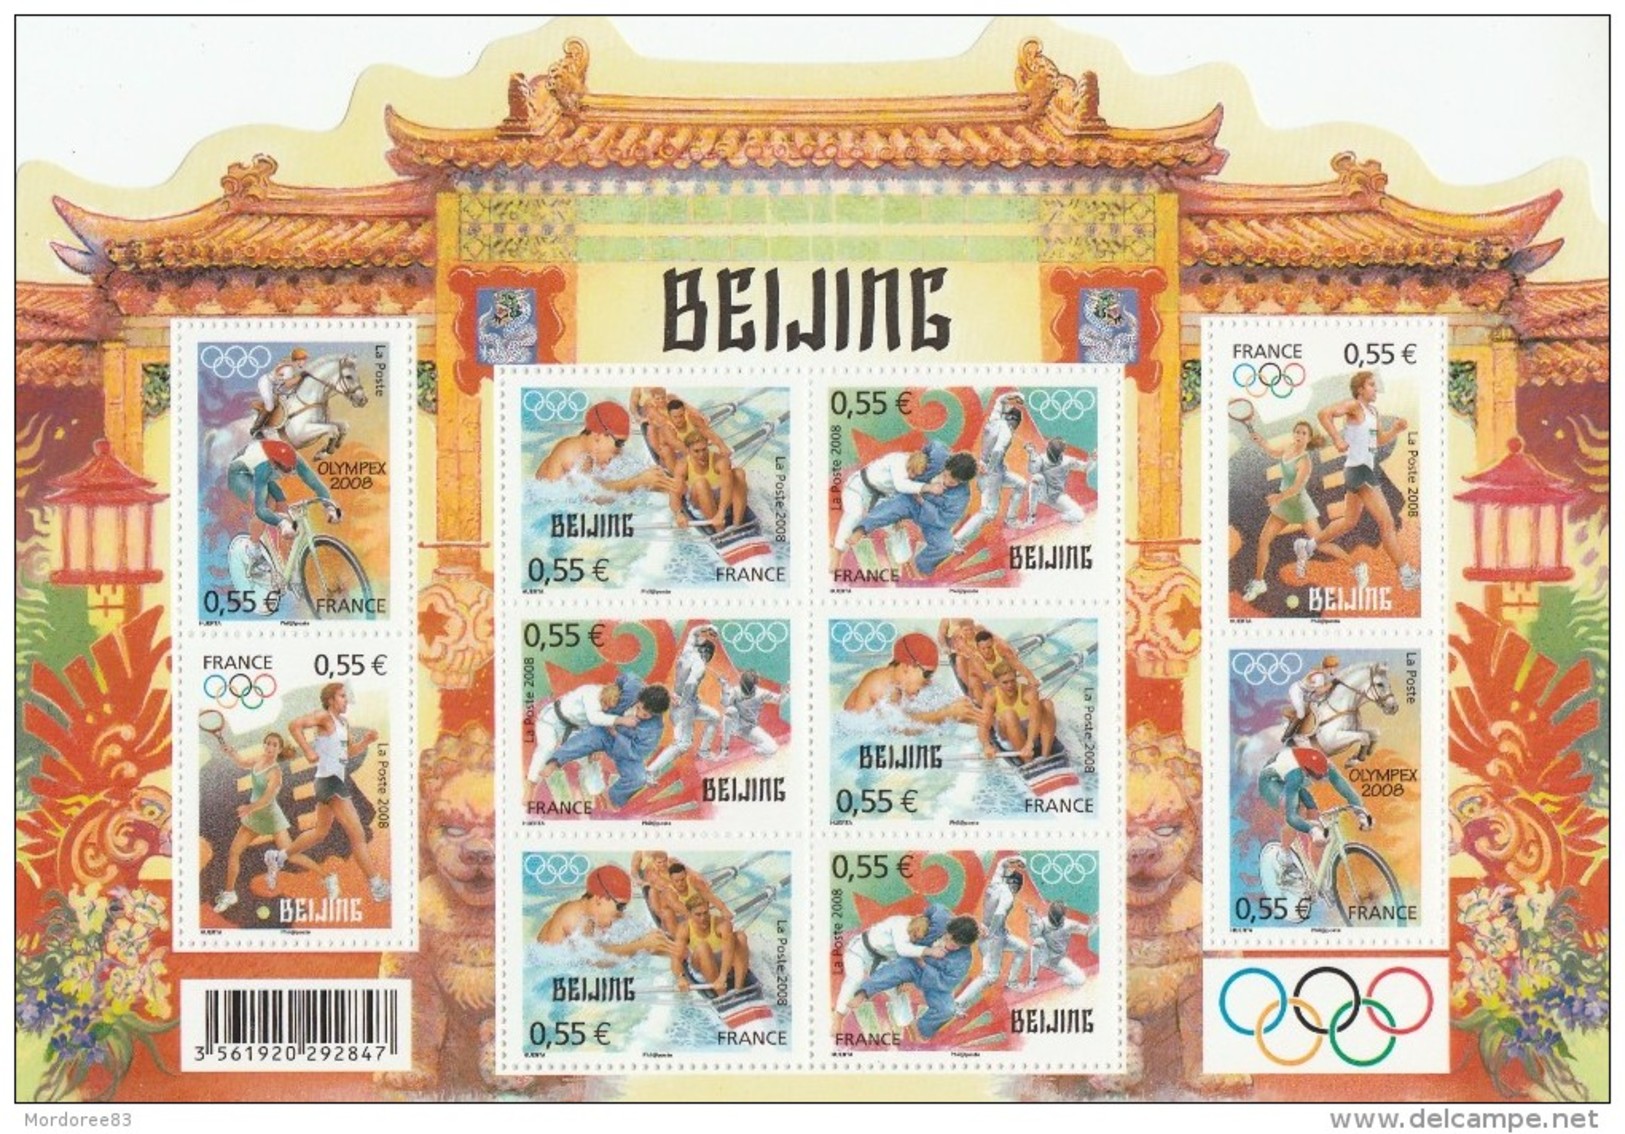 FRANCE 2008 BLOC NEUF** JEUX OLYMPIQUES D ETE A PEKIN - BF122  -BF 122  - - Mint/Hinged